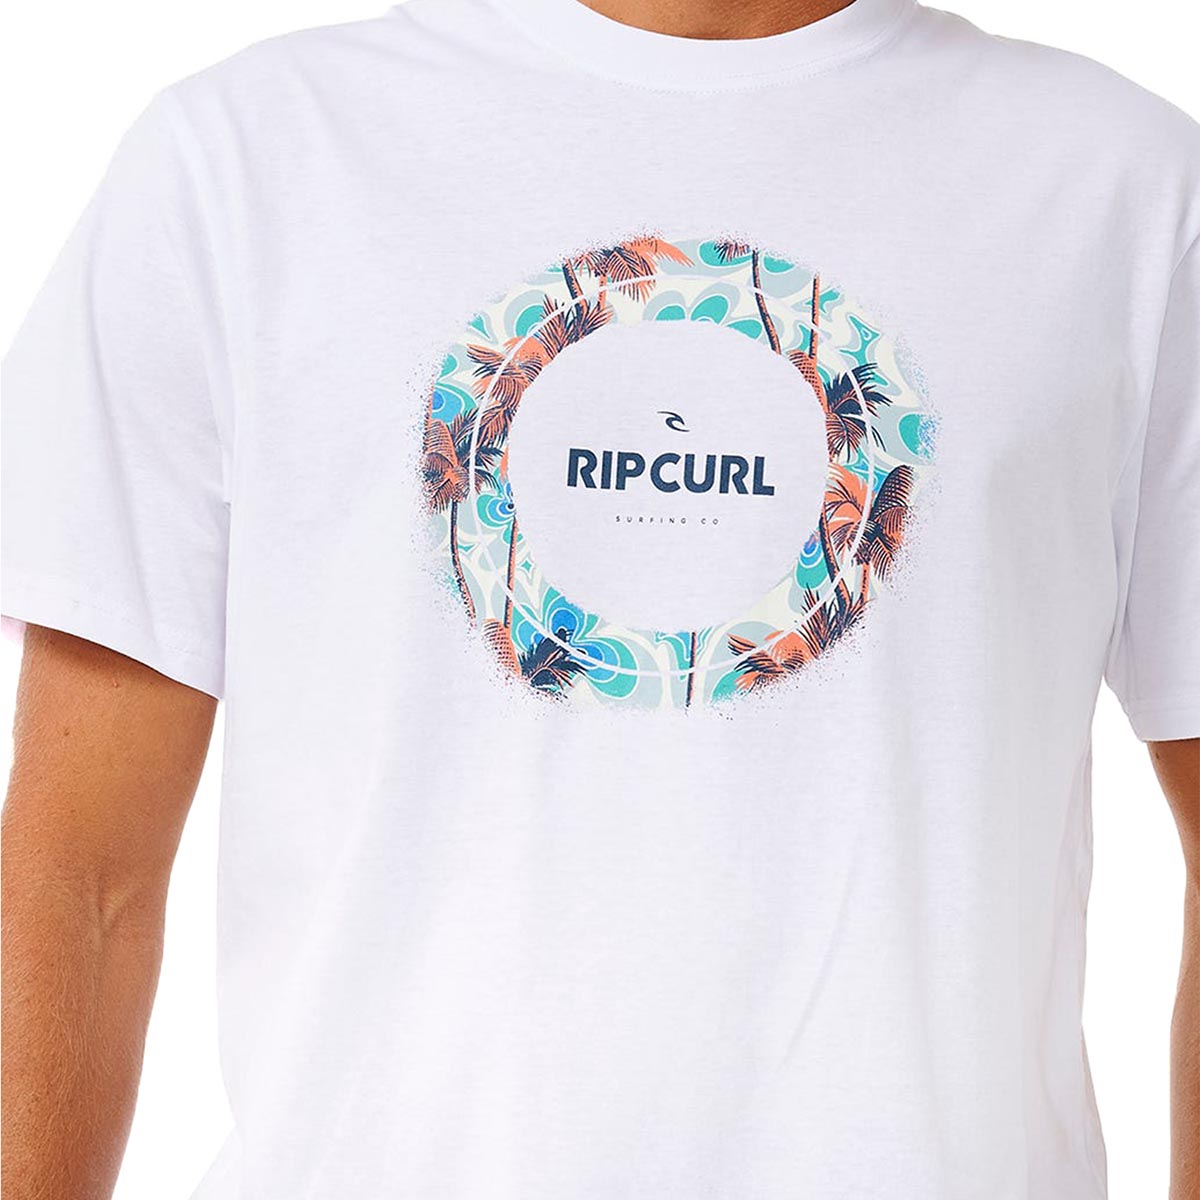 RIP CURL - FILL ME UP